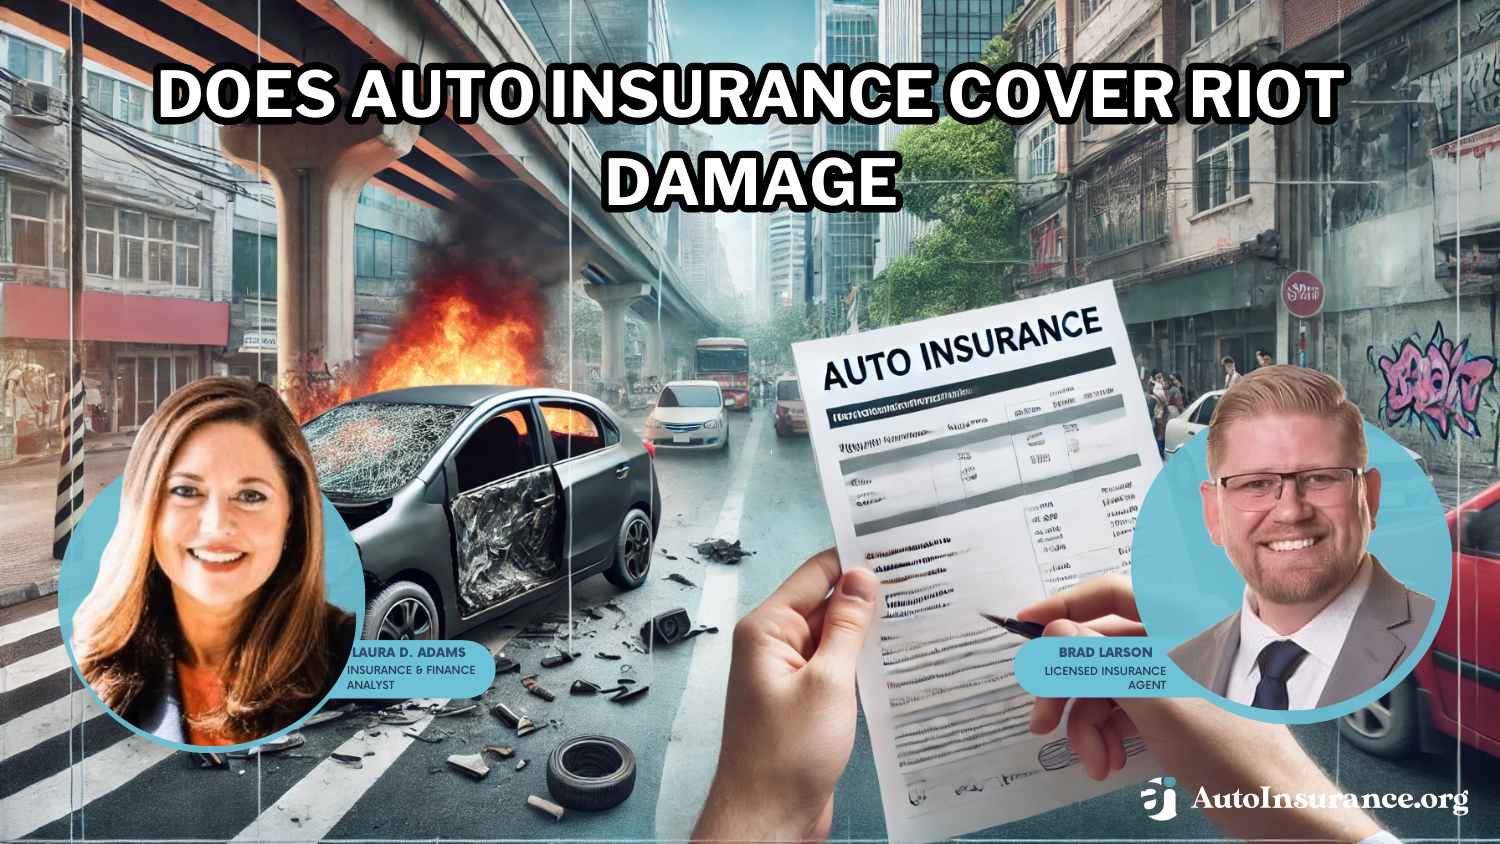 Does auto insurance cover riot damage?